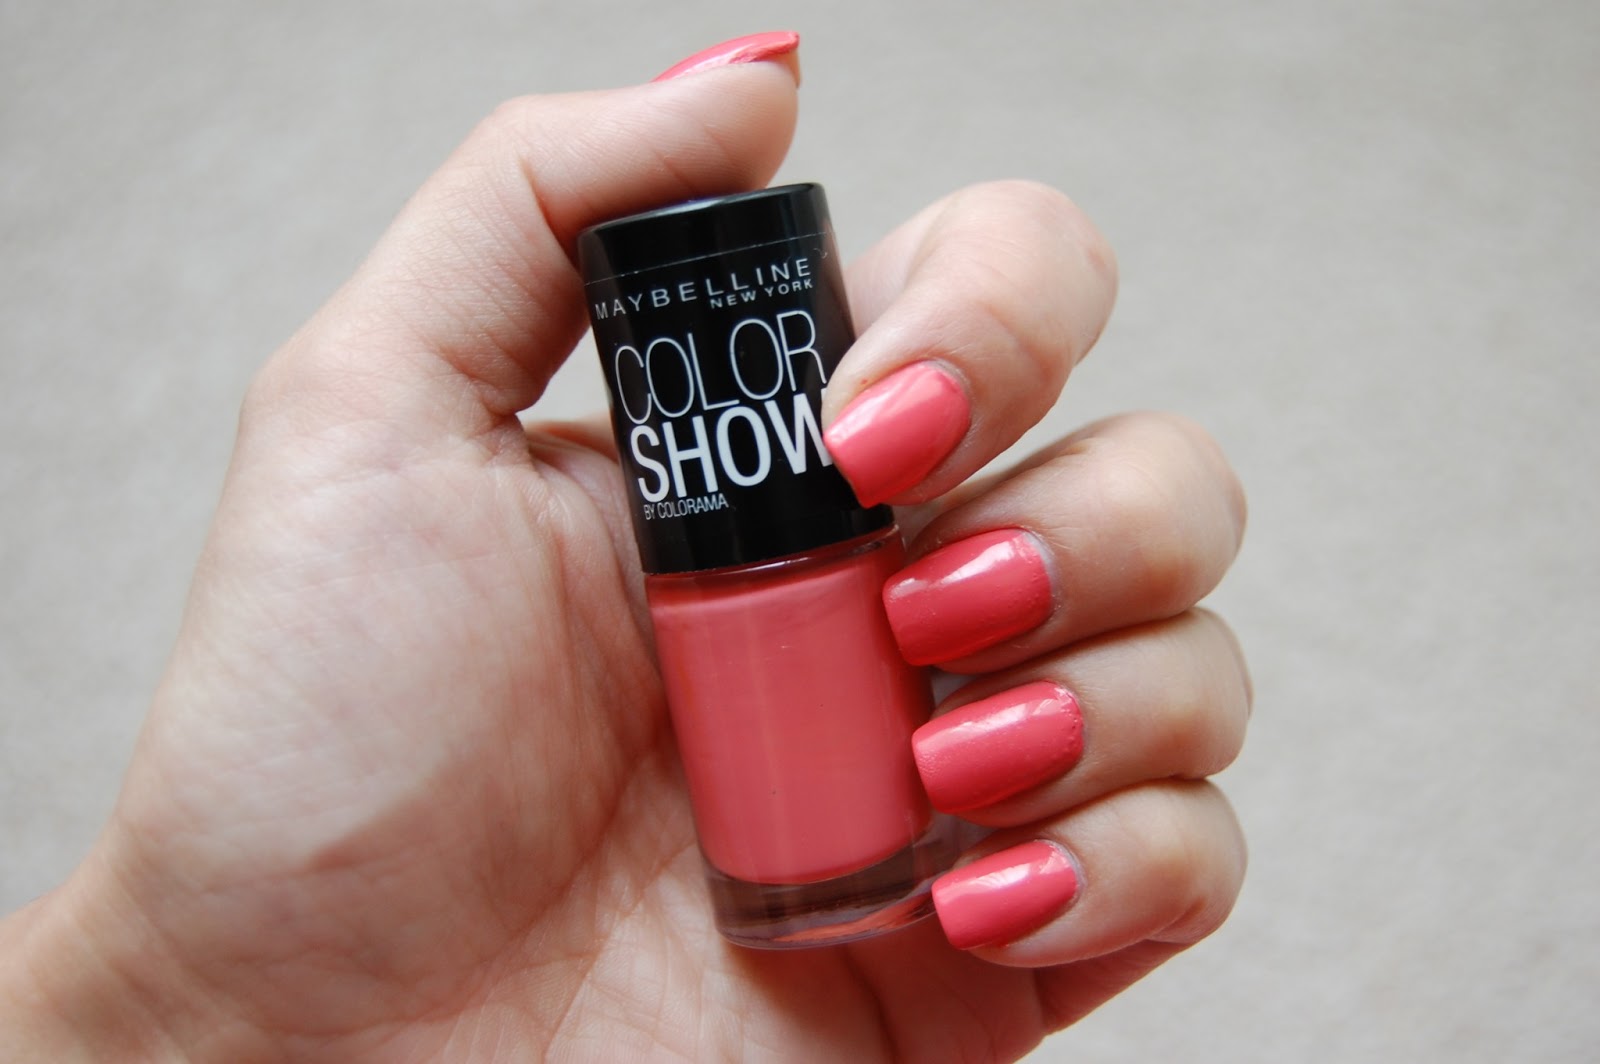 Maybelline Color Show Nail Polish in Coral Craze - wide 1